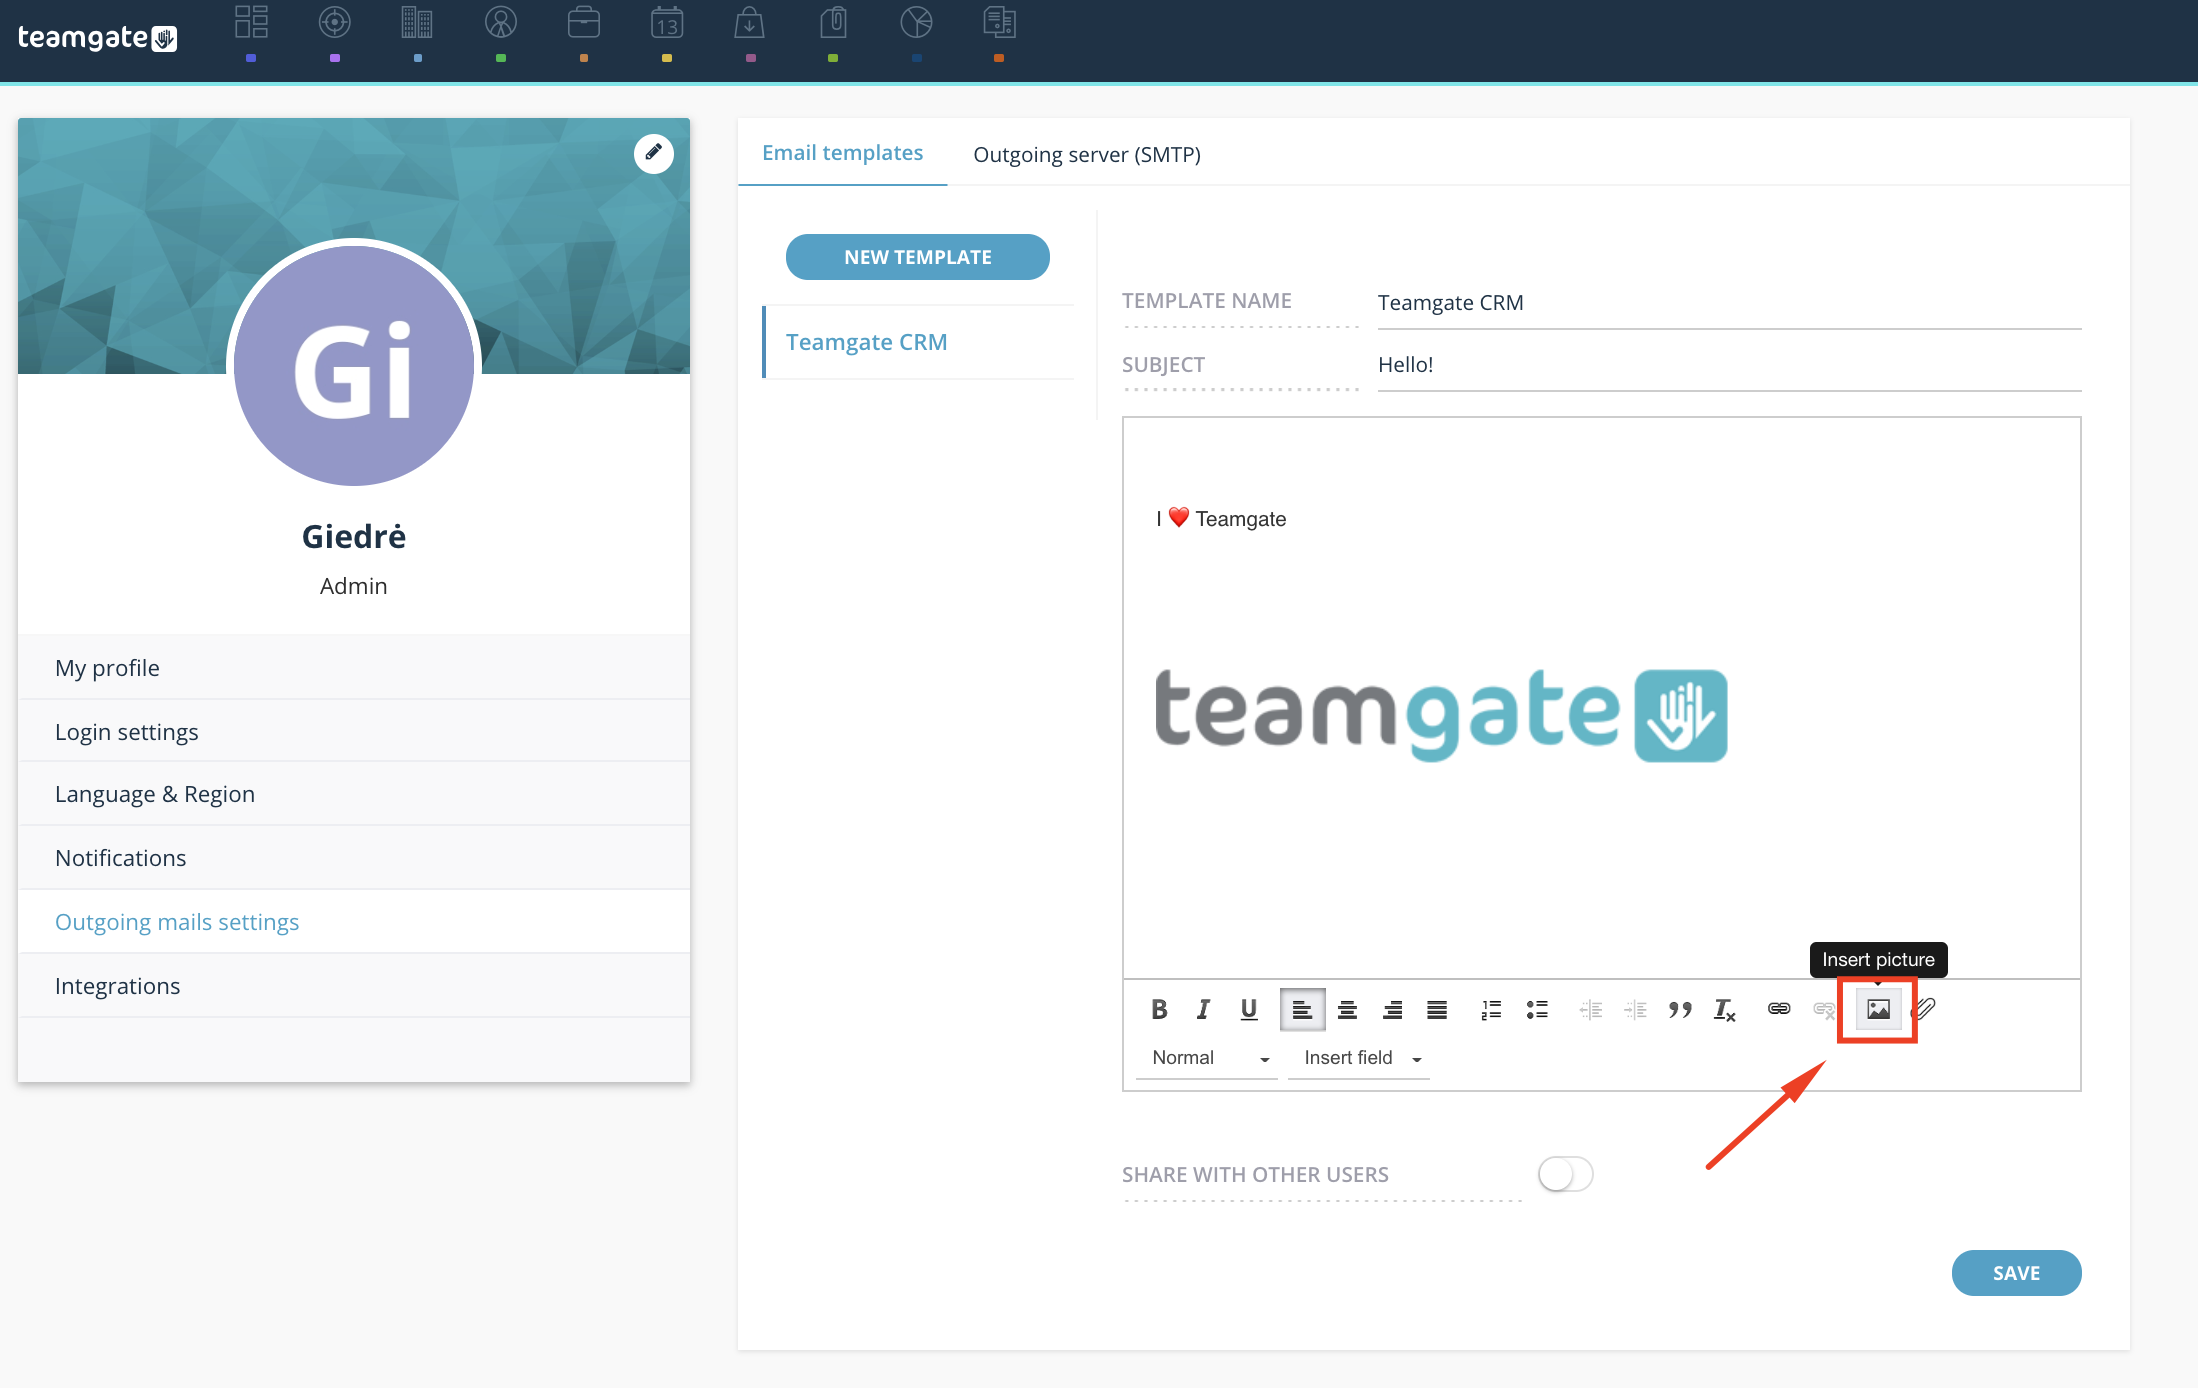 Insert-pictures-to-email-templates-in-Teamgate-CRM.png